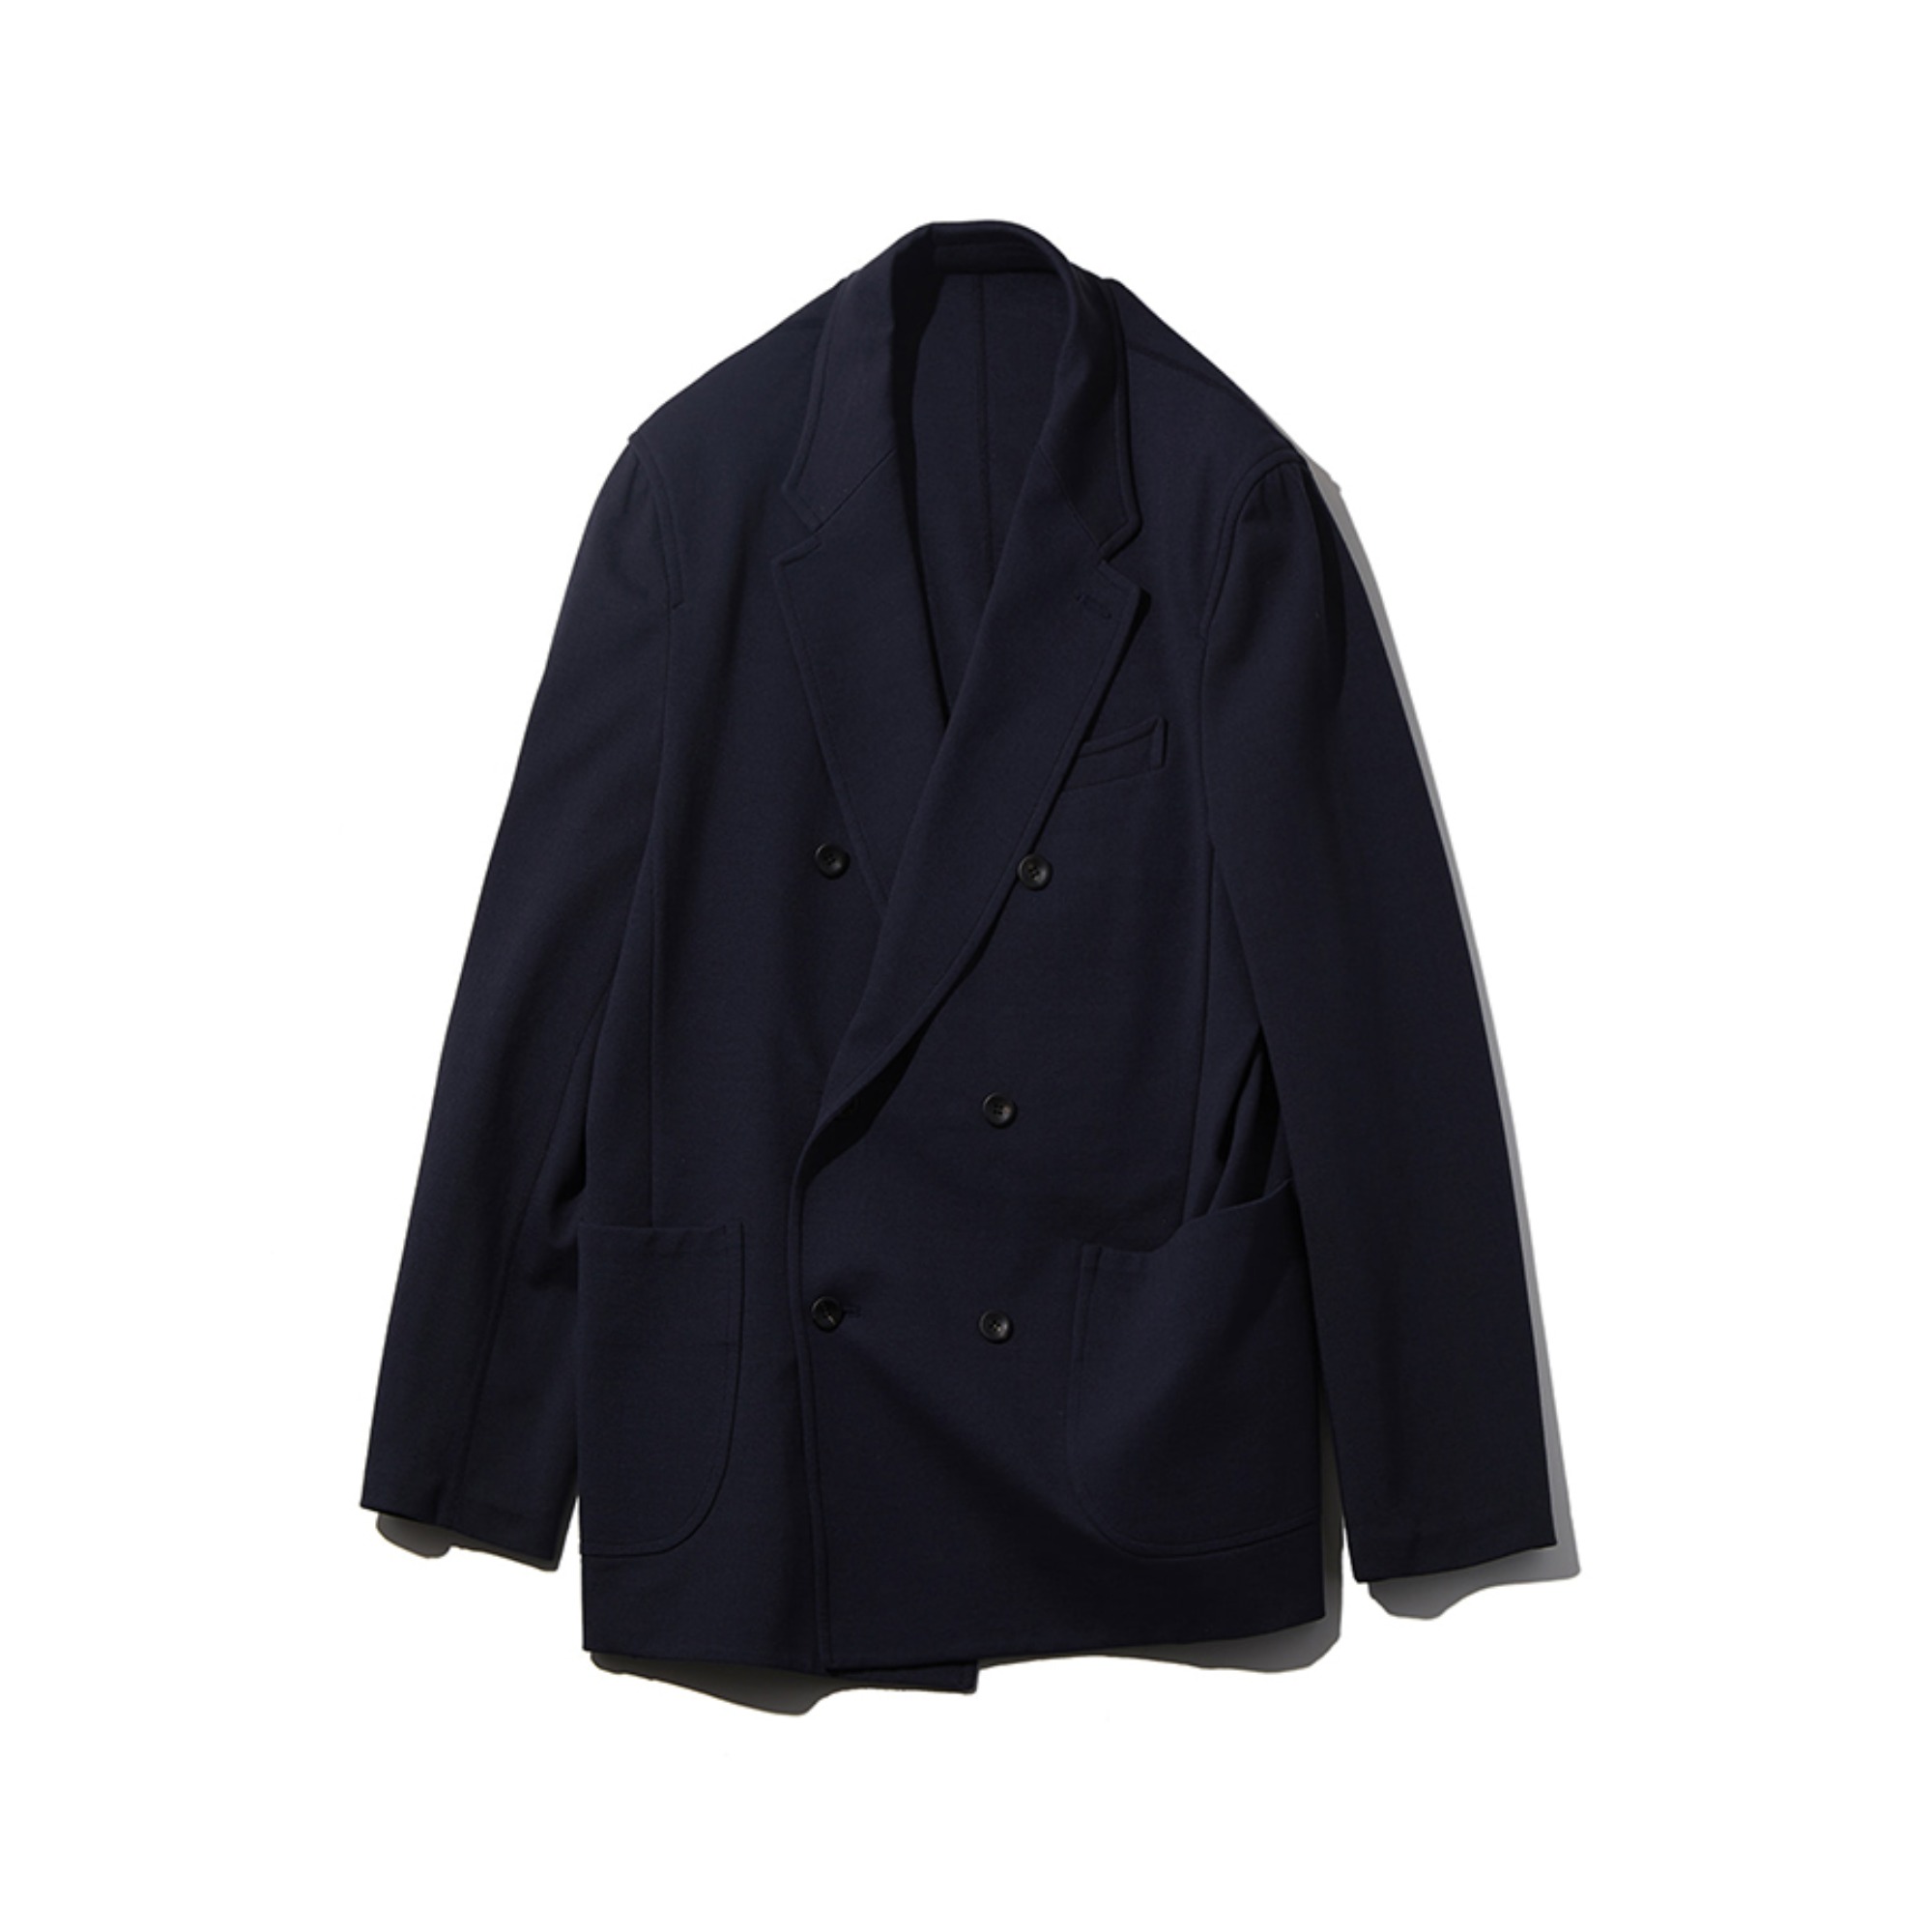 THE DOCUMENT JERSEY JACKET (NAVY)